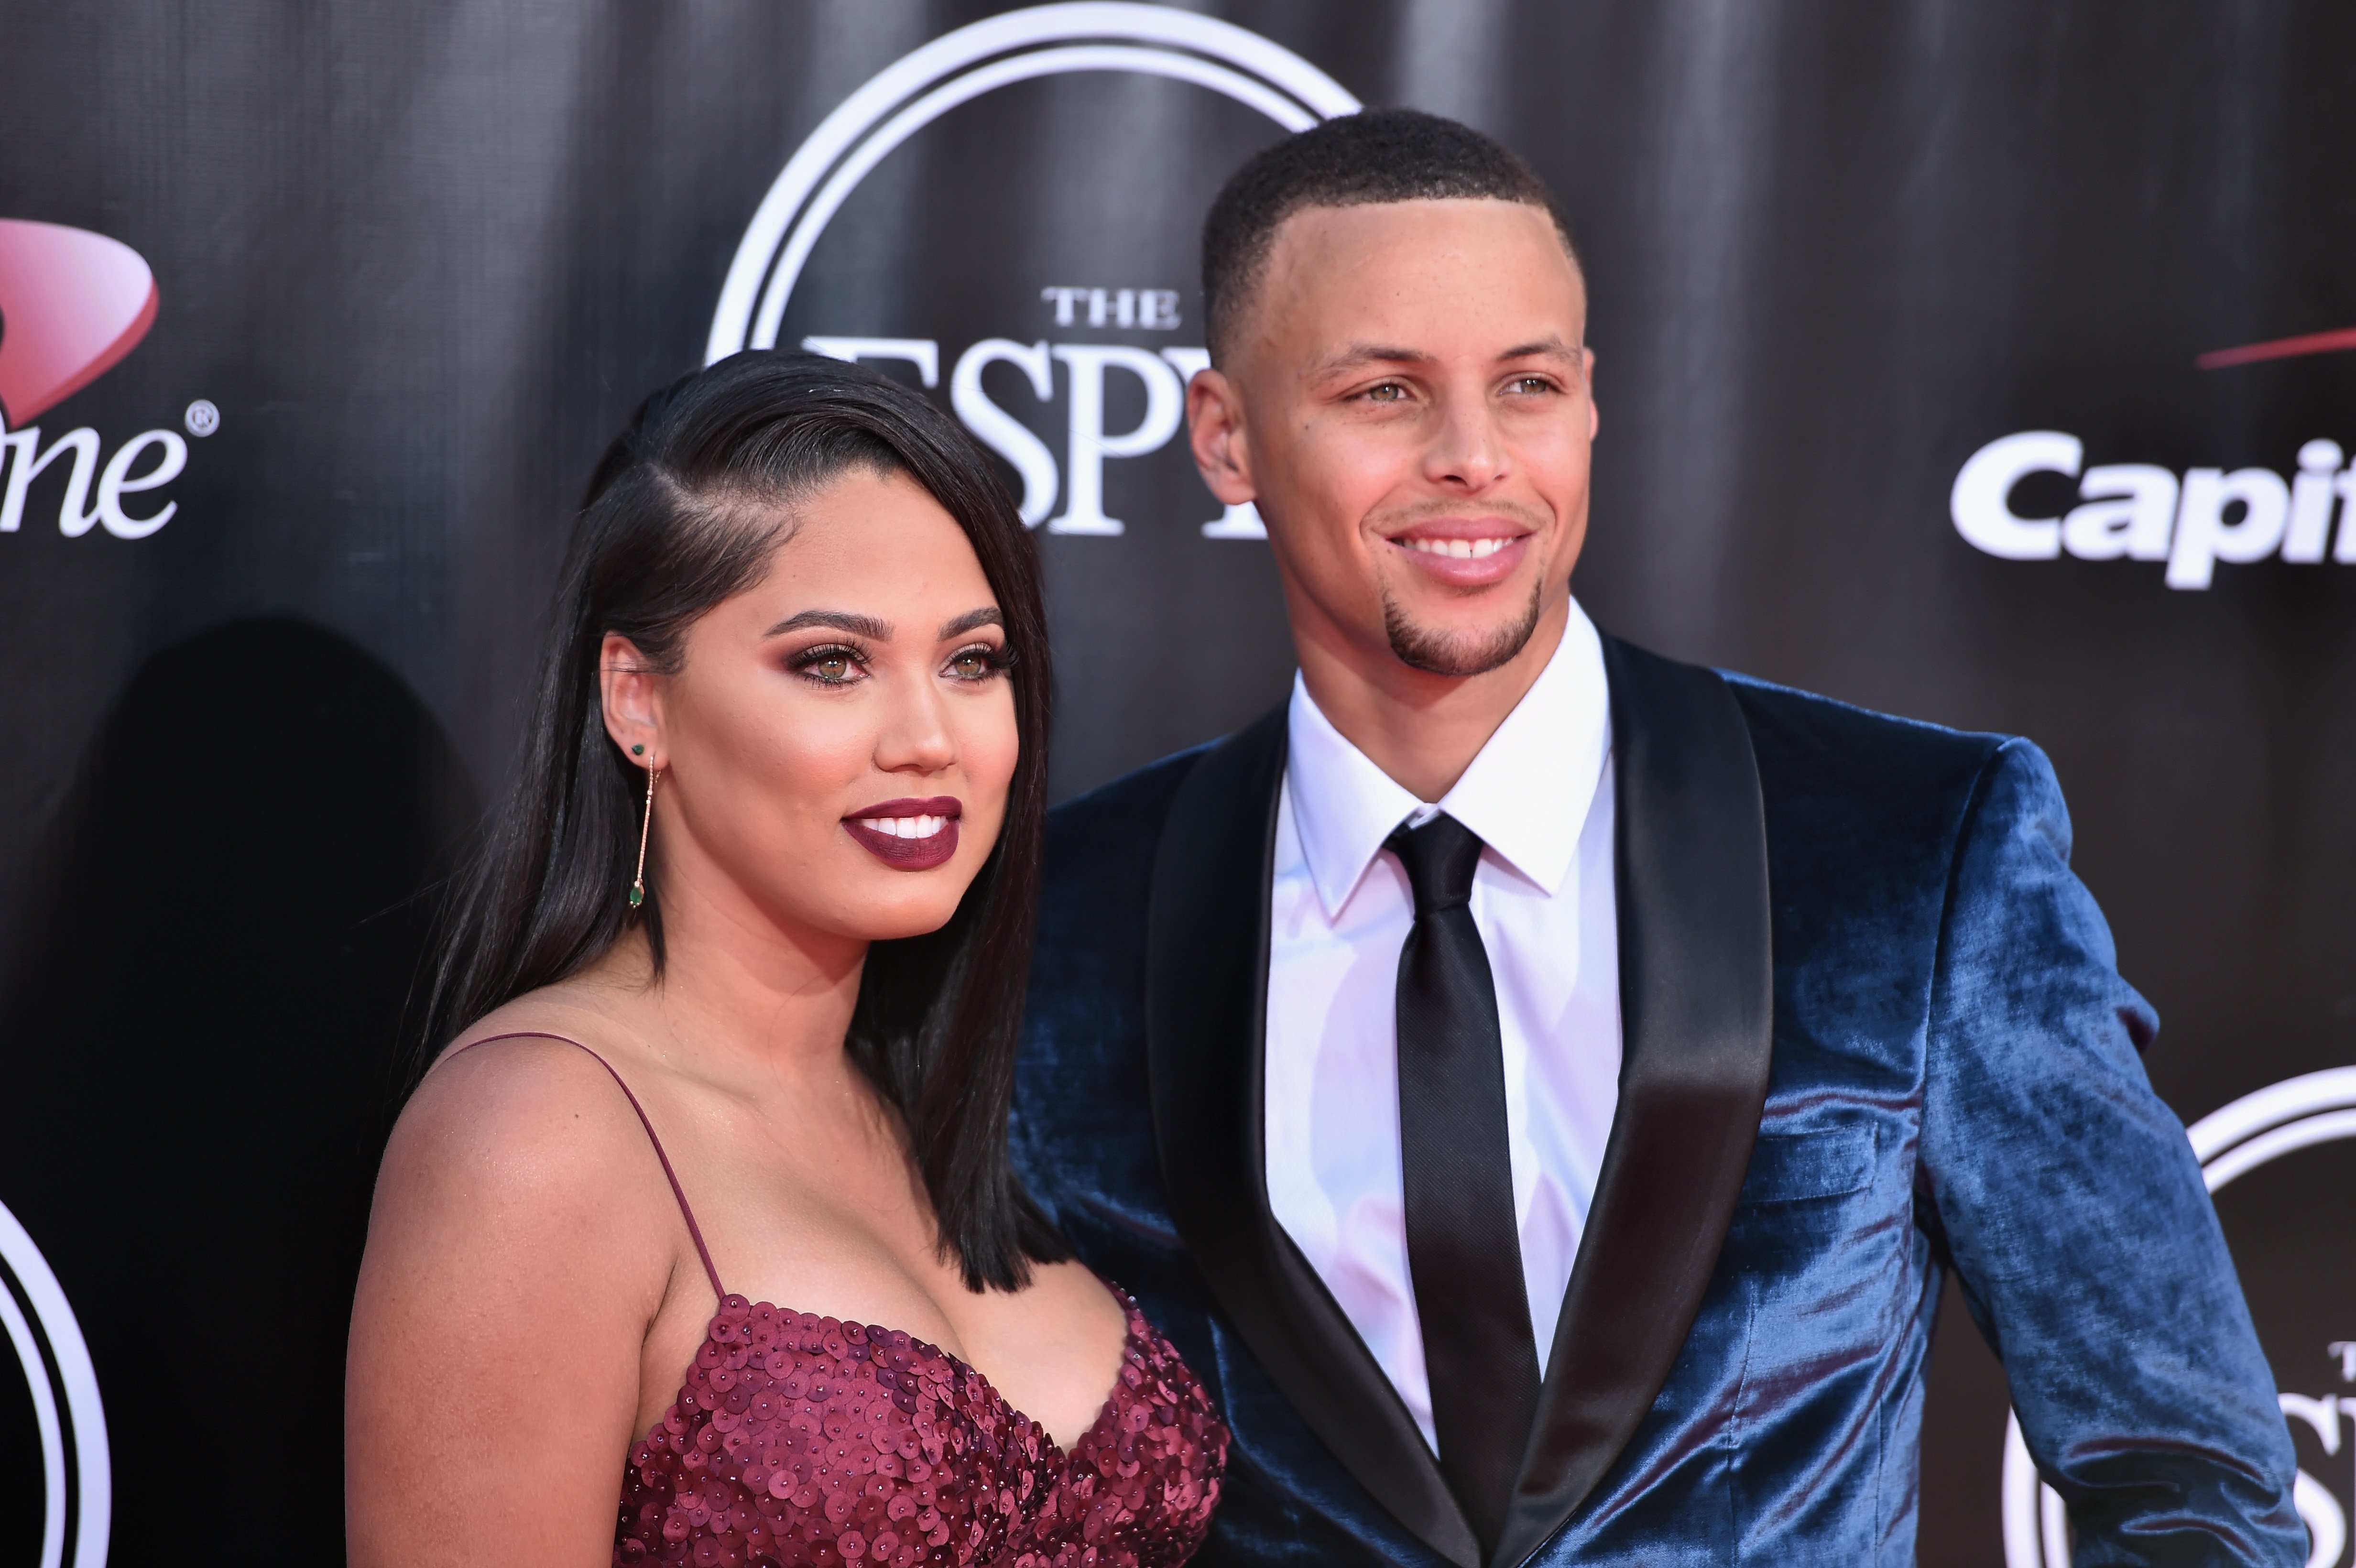 NBA player Stephen Curry and Ayesha Curry attend the 2016 ESPYS at Microsoft Theater on July 13, 2016 in Los Angeles, California | Photo: Getty Images